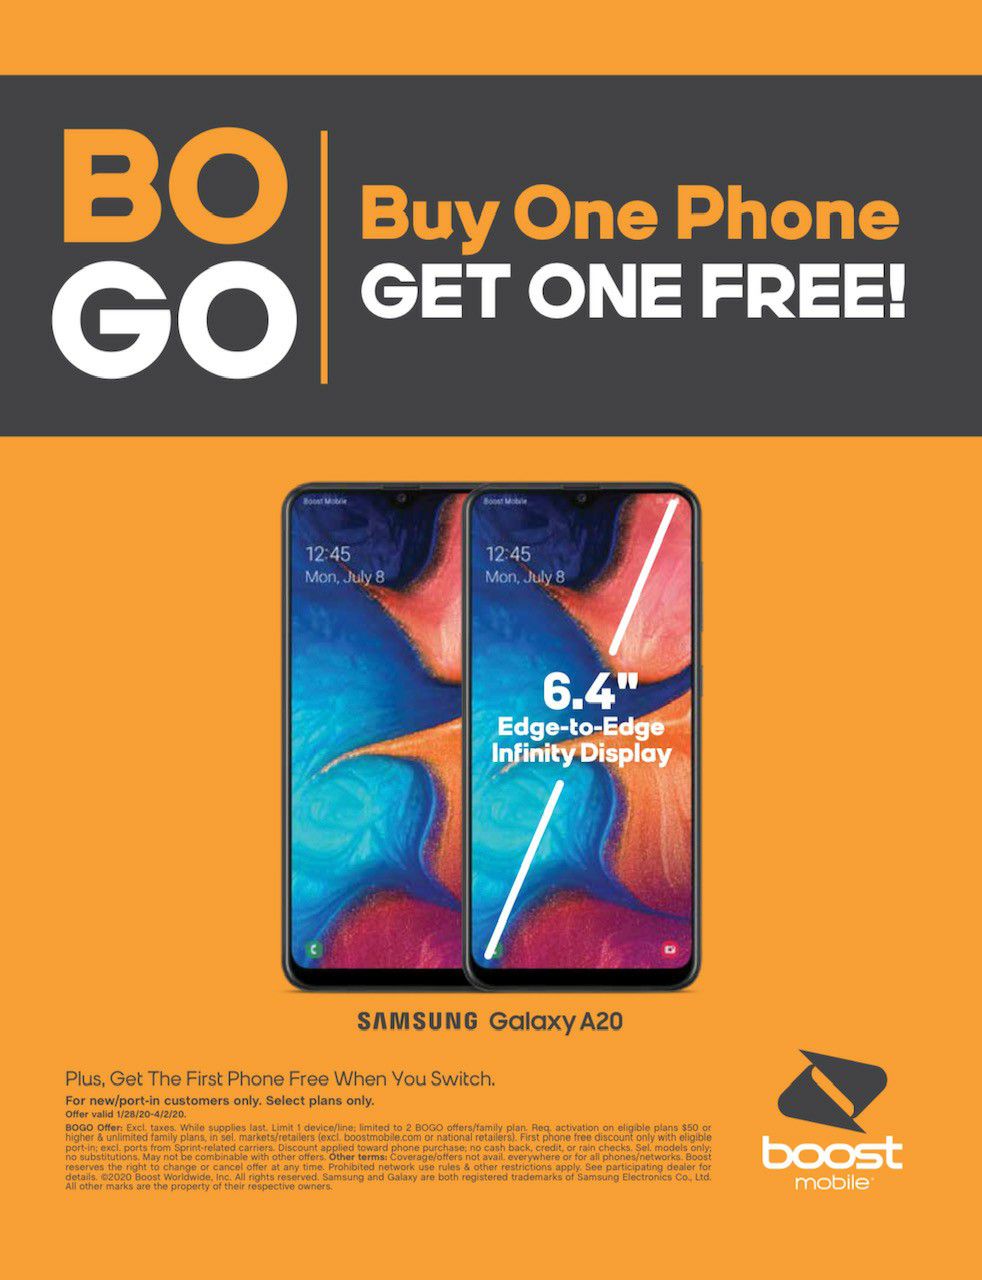 4 FREE Samsung A20's with NEW/PORT Service